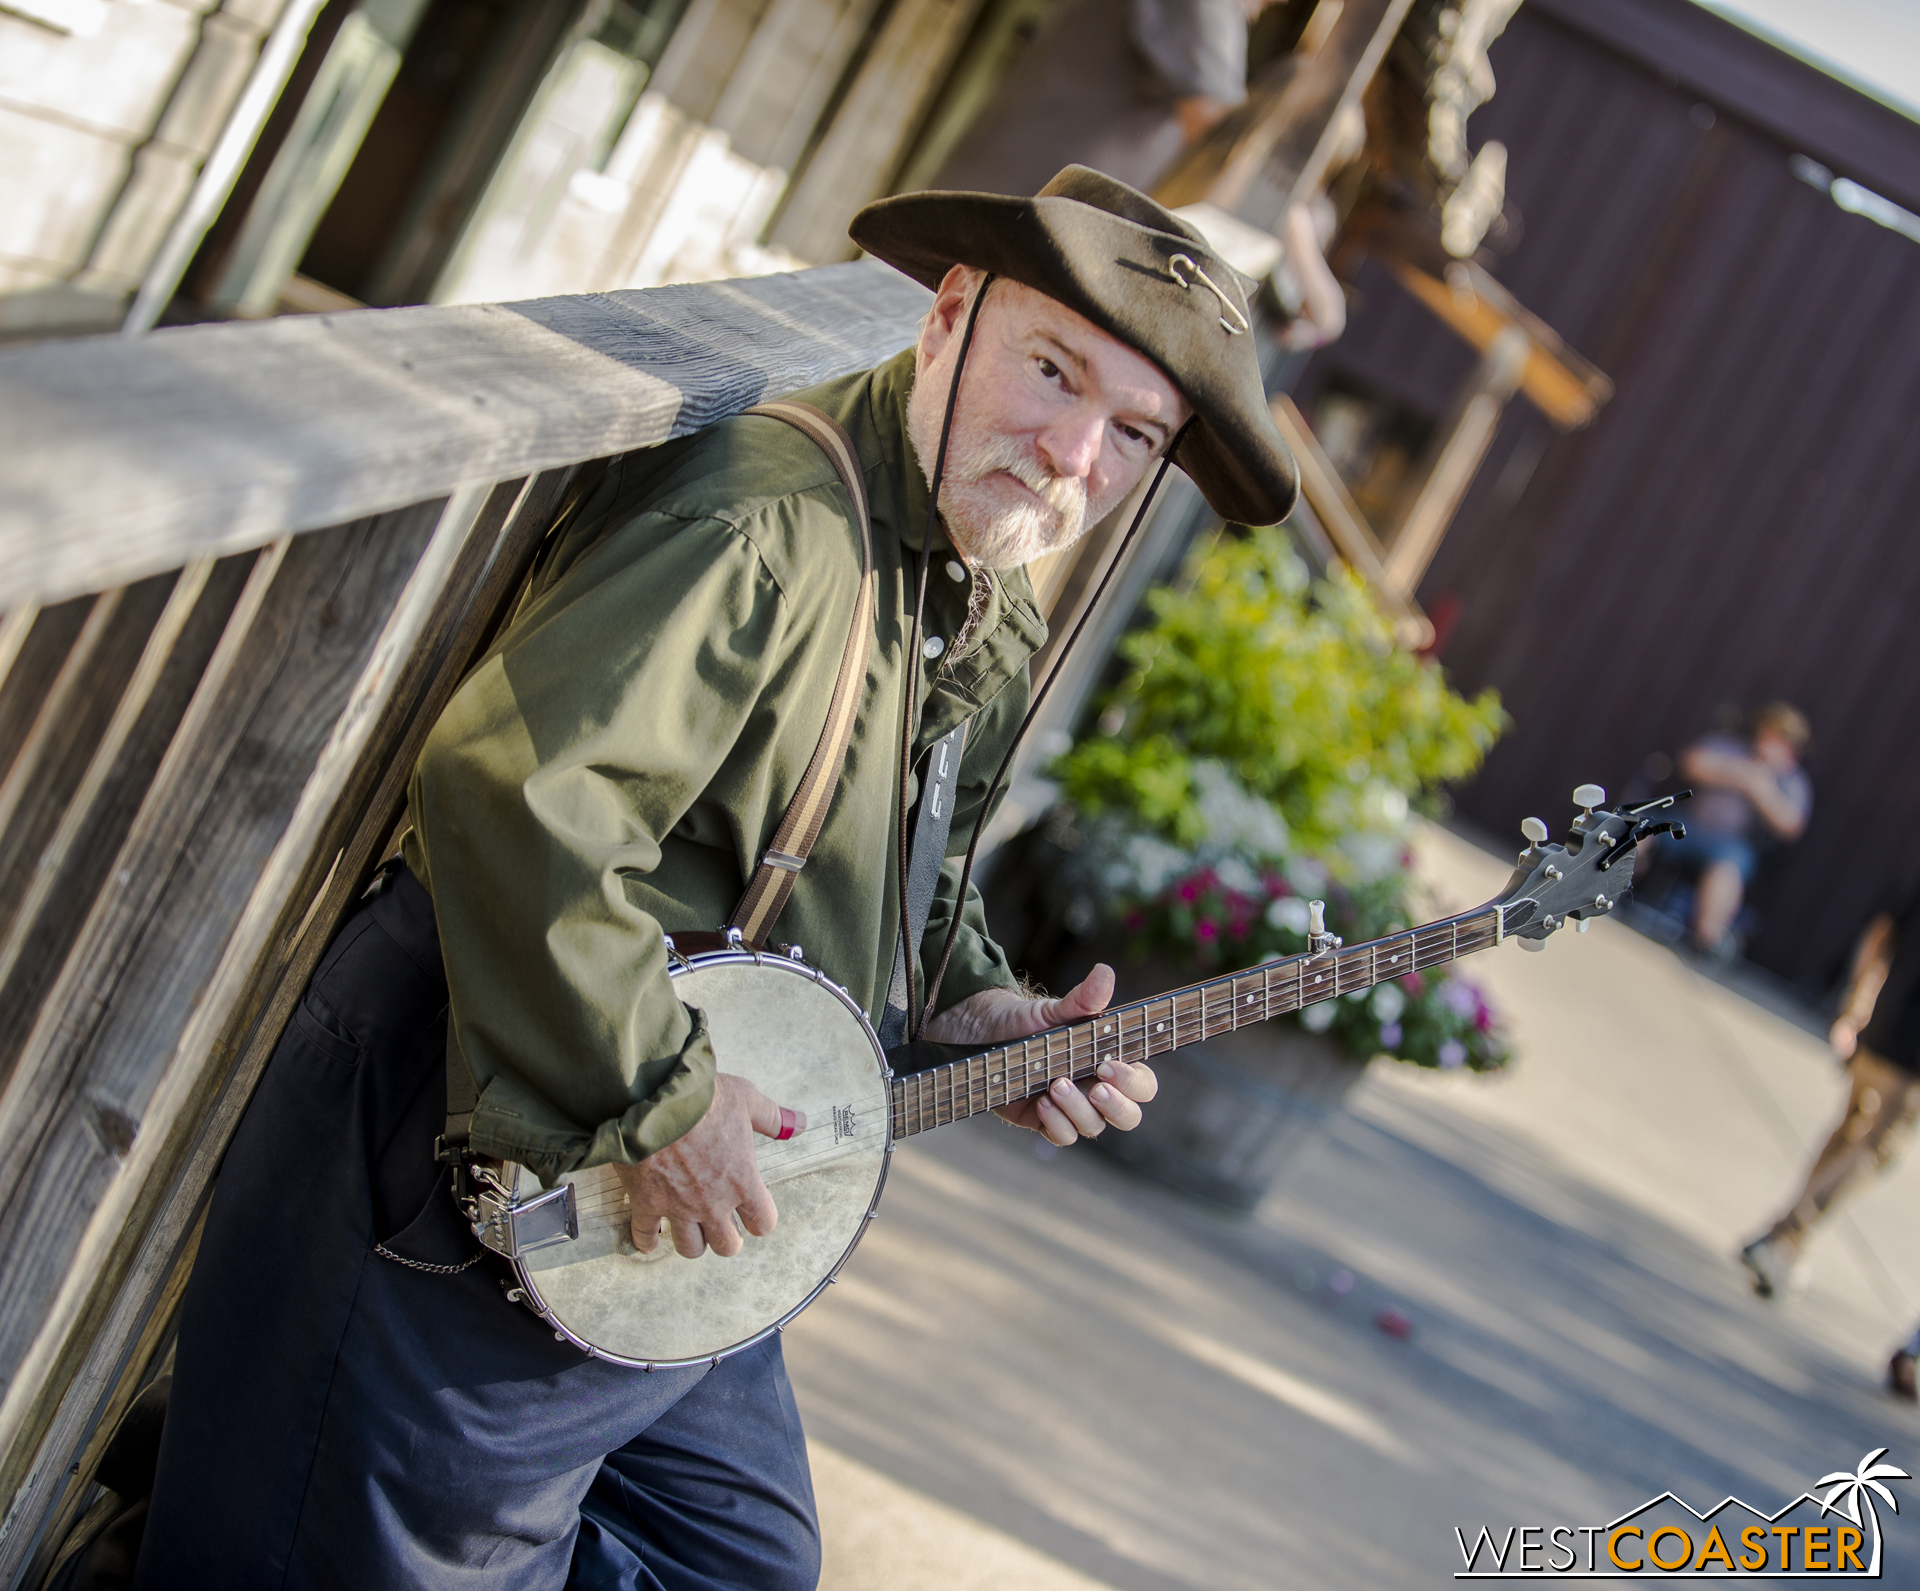  Prospector "Cannonball" plays the banjo when he is not panning for gold.   